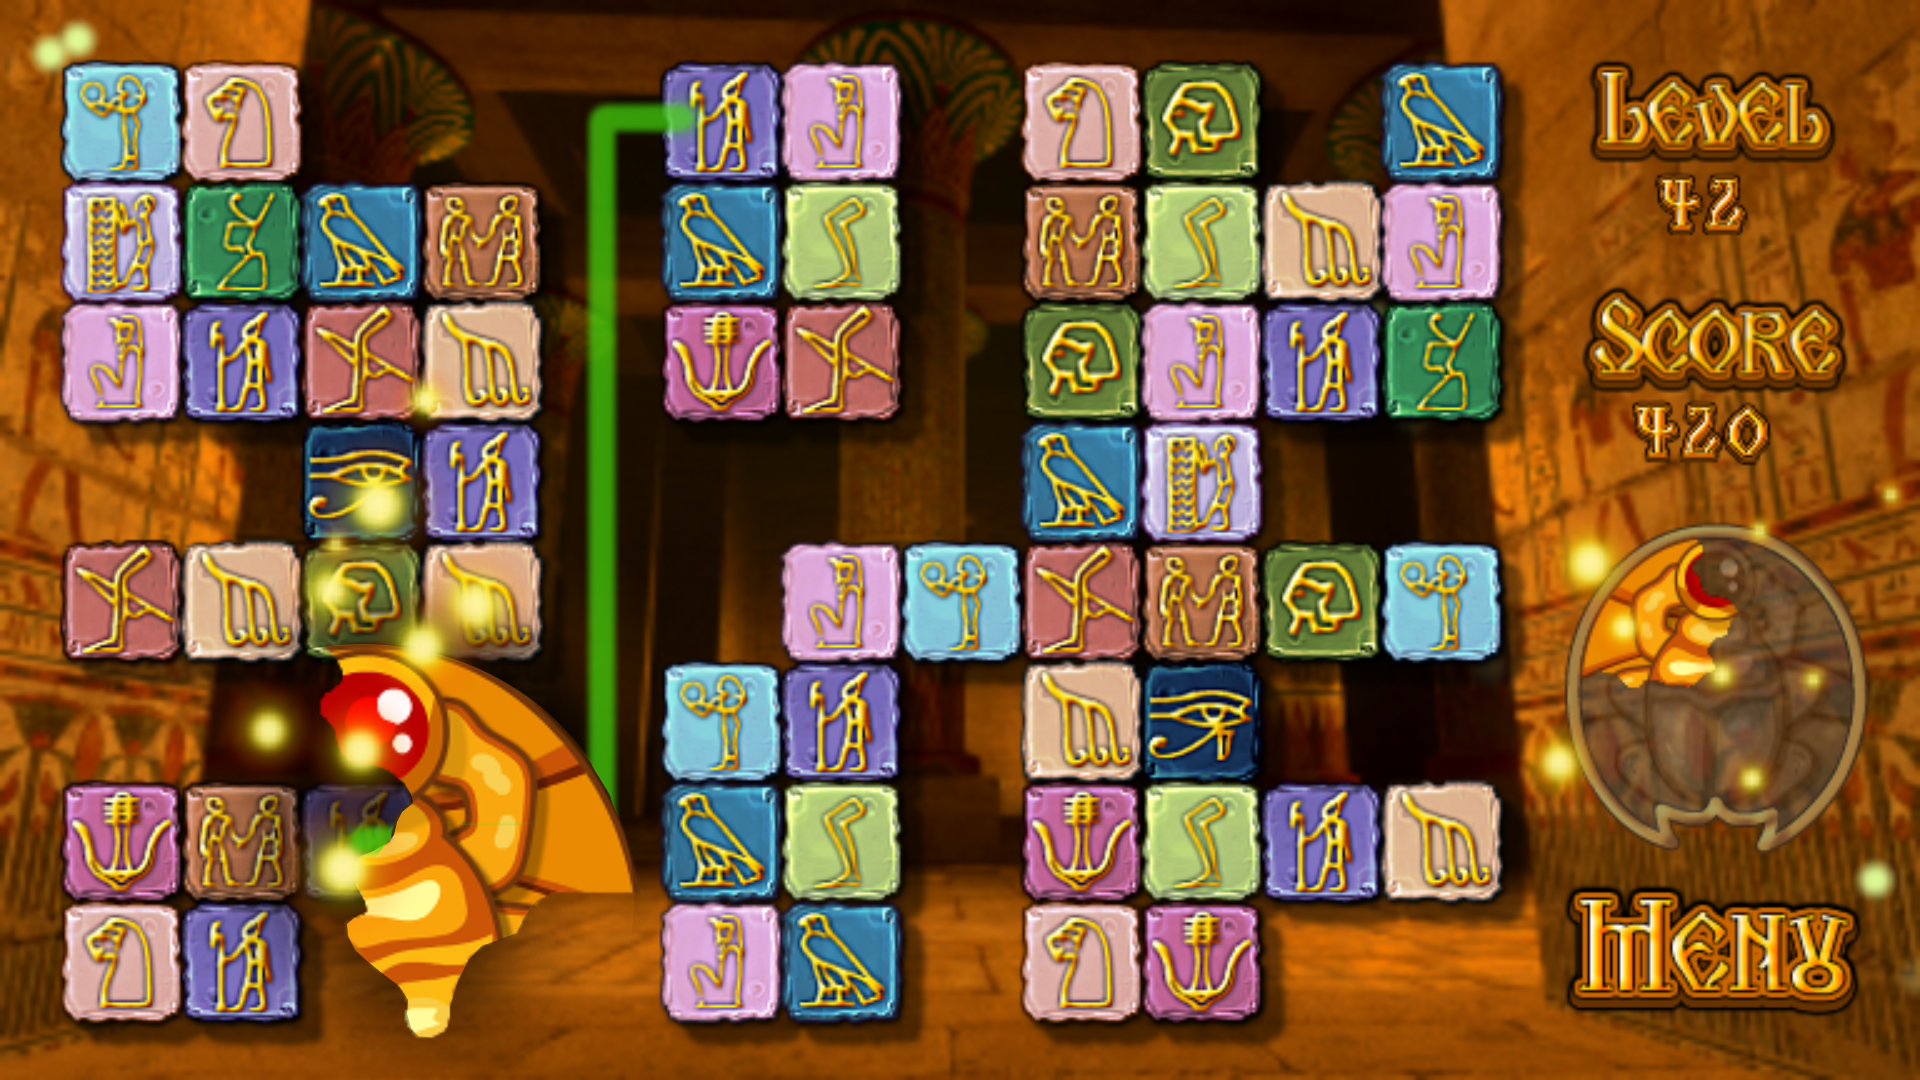 Android application Pyramid Quest - Matching Tiles screenshort